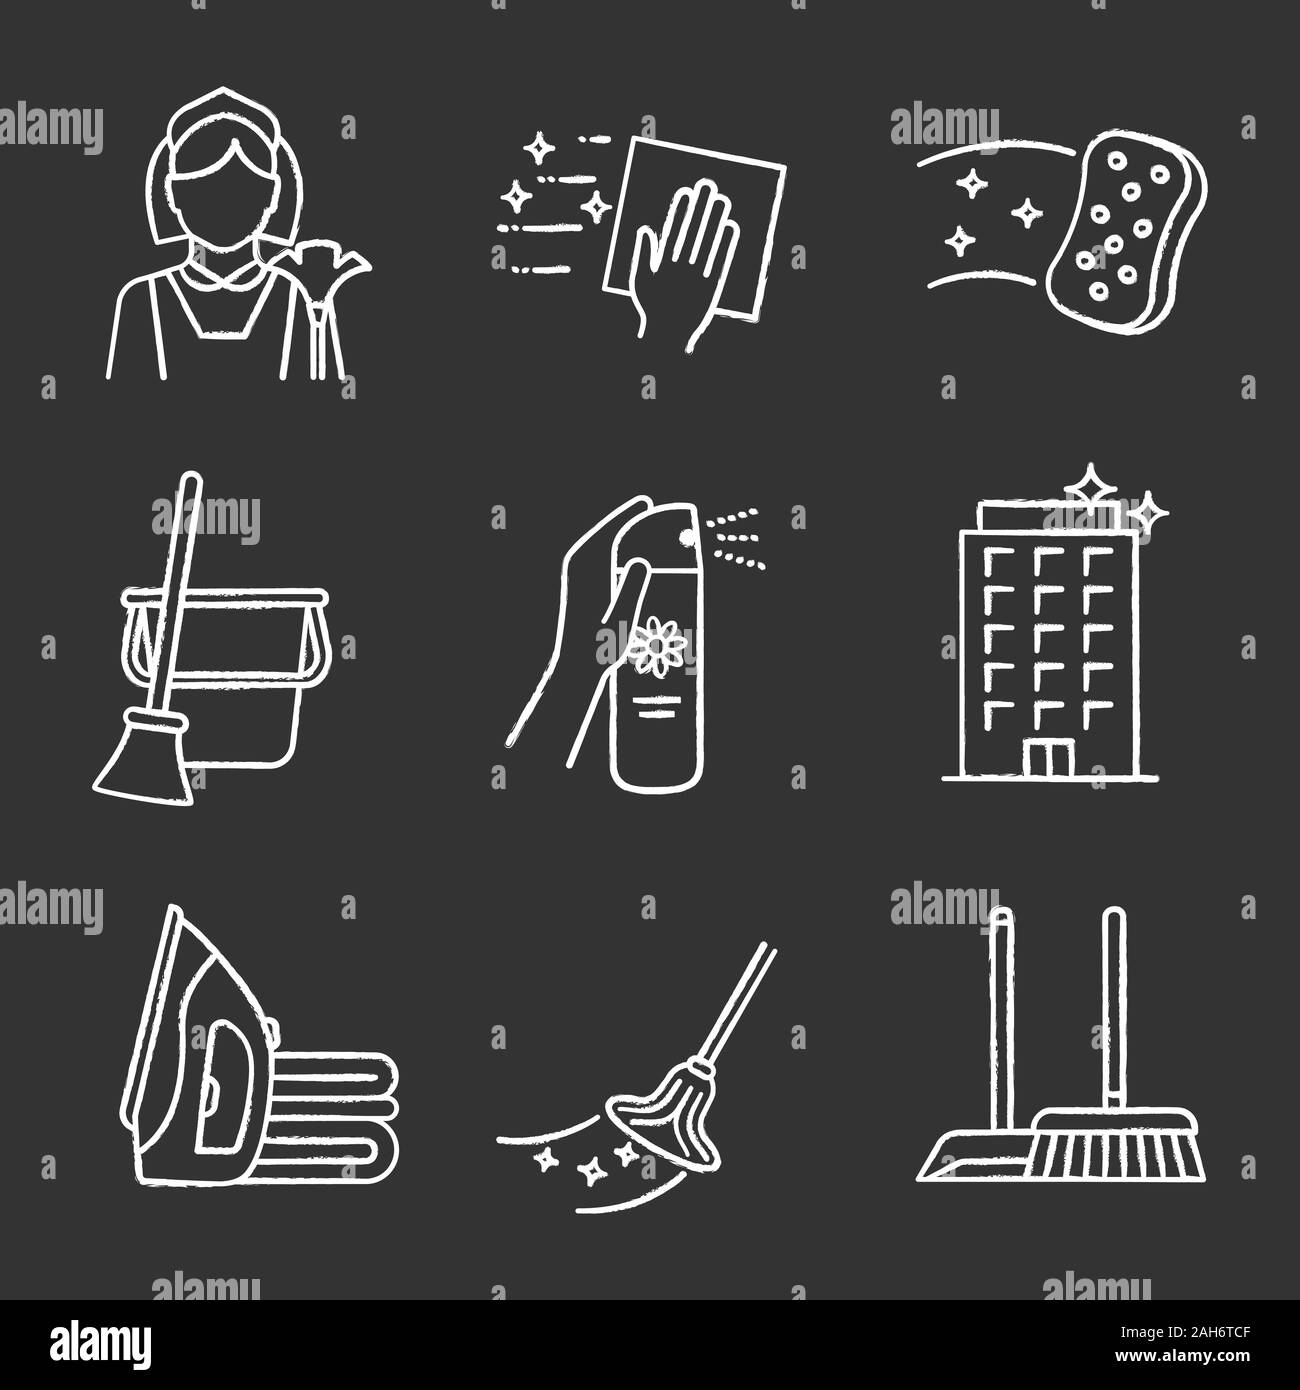 https://c8.alamy.com/comp/2AH6TCF/cleaning-service-chalk-icons-set-maid-napkin-sponge-broom-and-bucket-air-freshener-ironing-offices-cleaning-scoop-brush-mop-isolated-vector-2AH6TCF.jpg